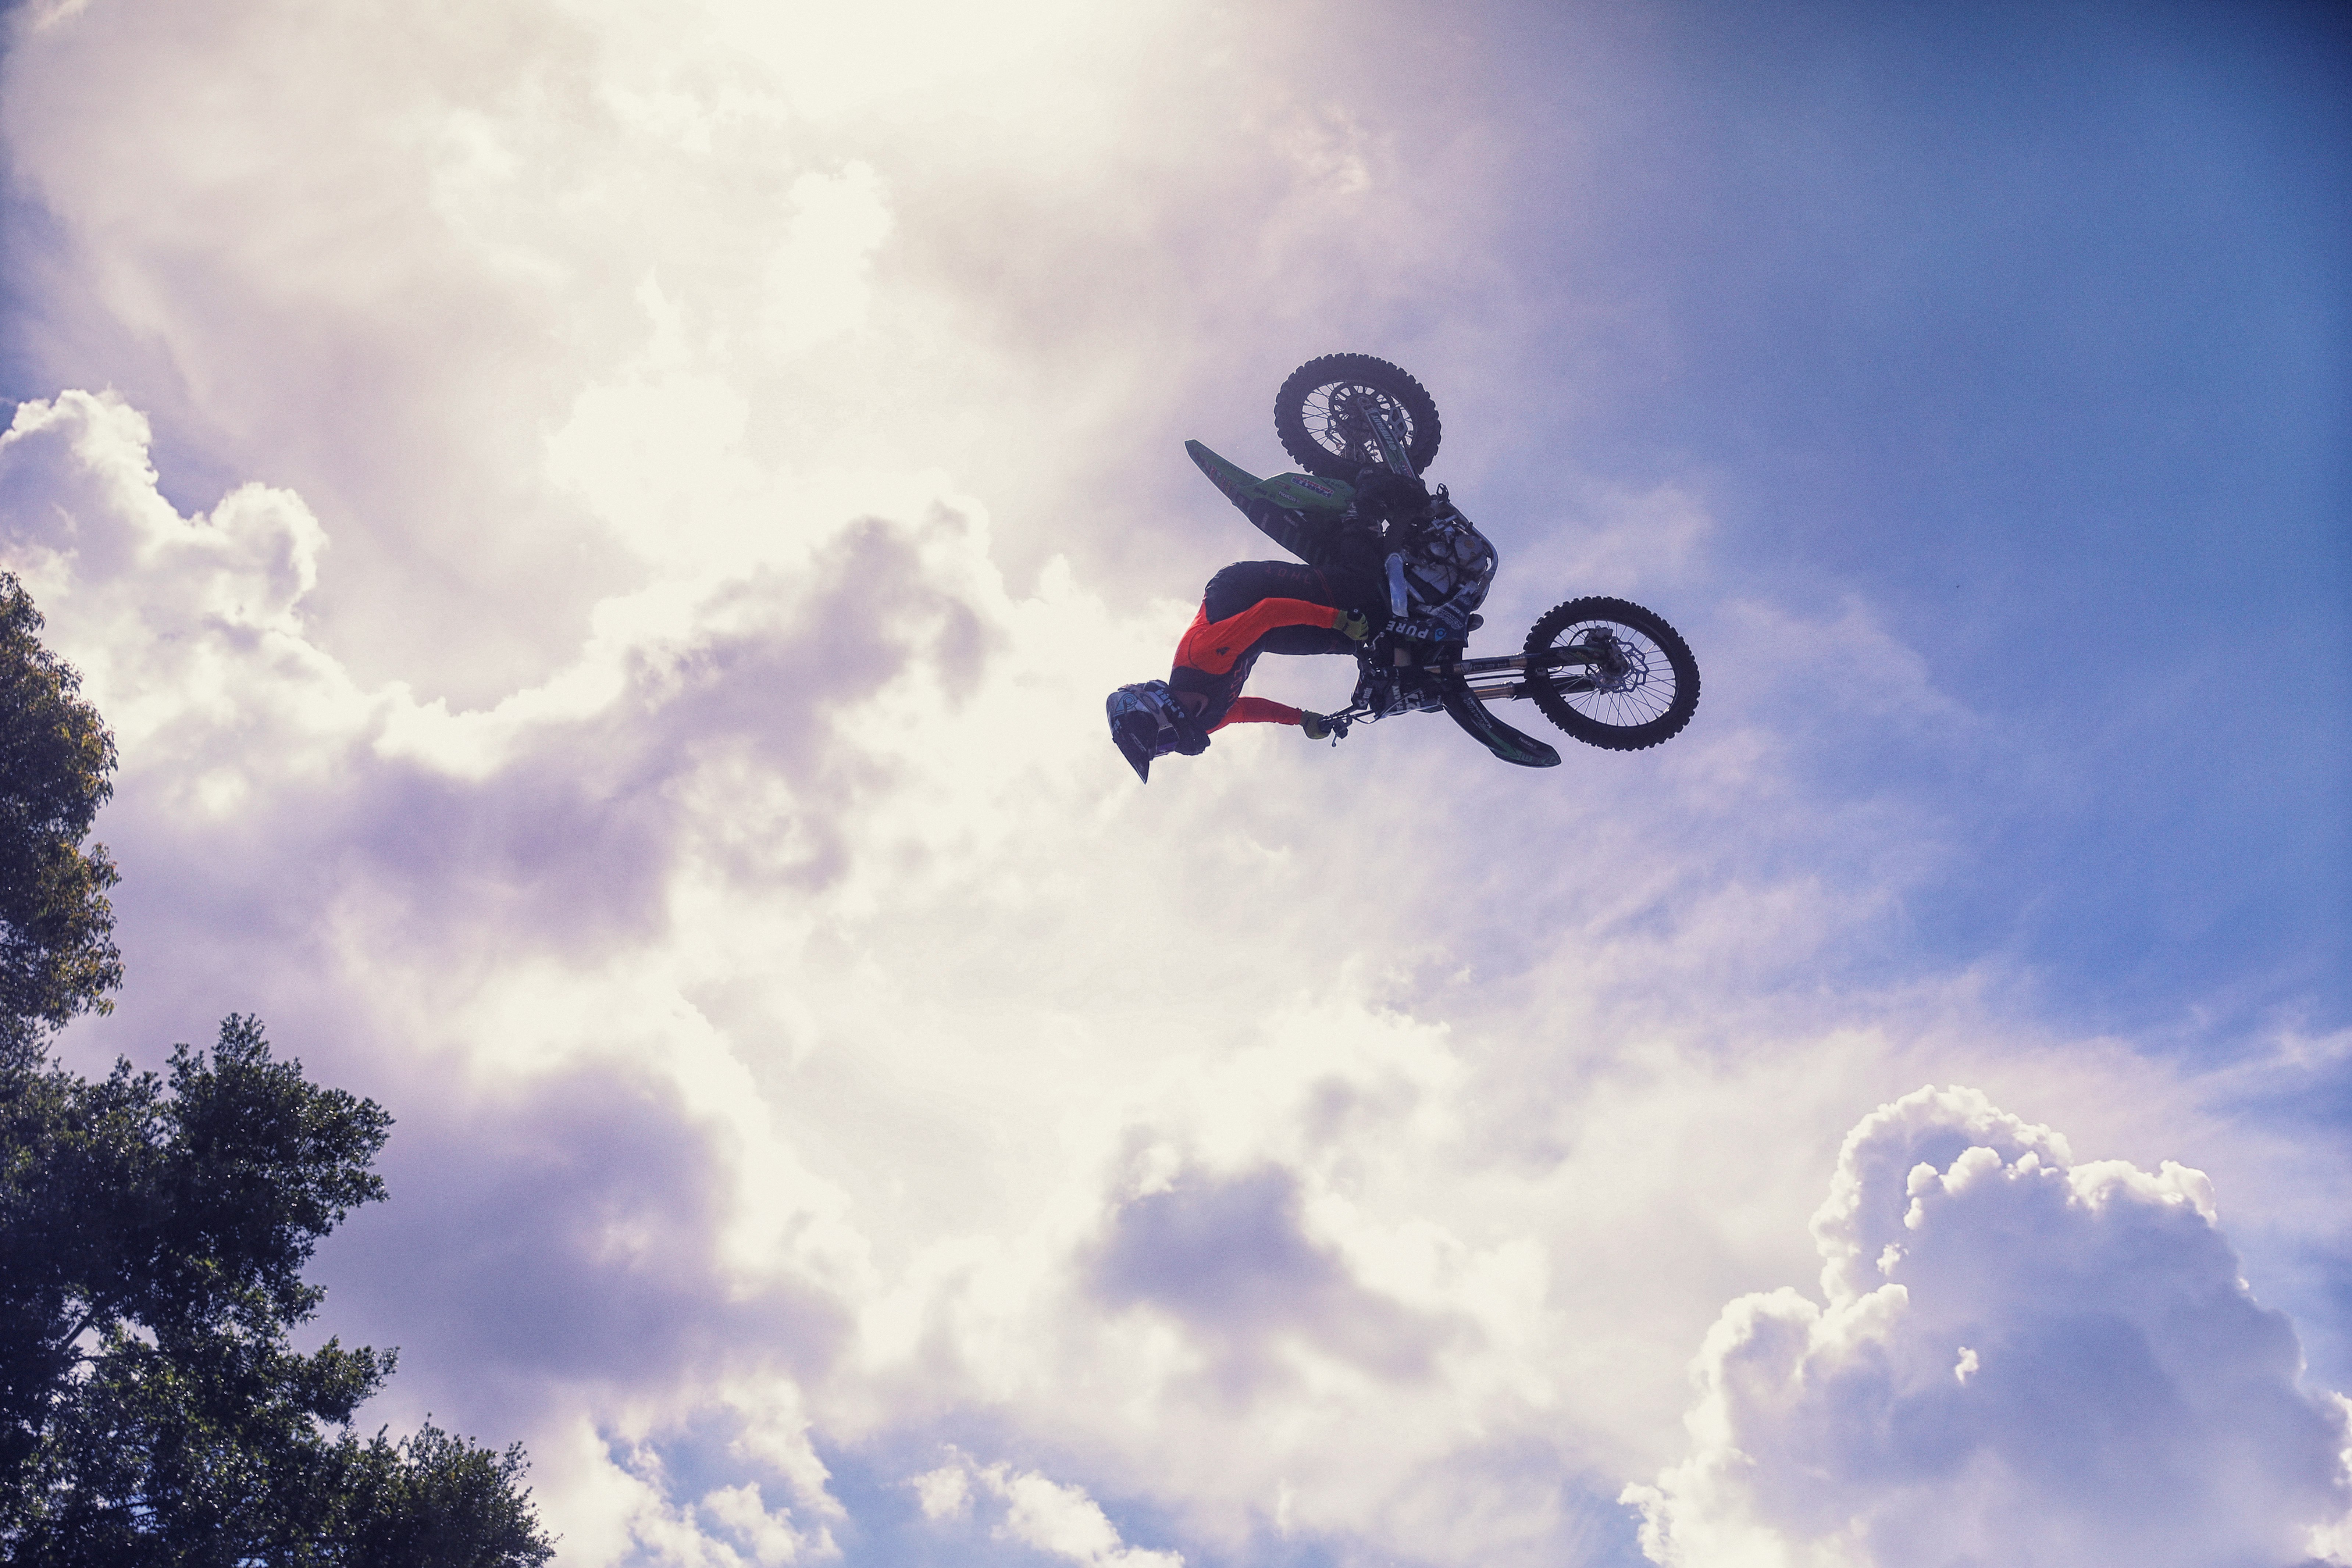 man riding on motocross dirt bike under white clouds and blue sky during daytime